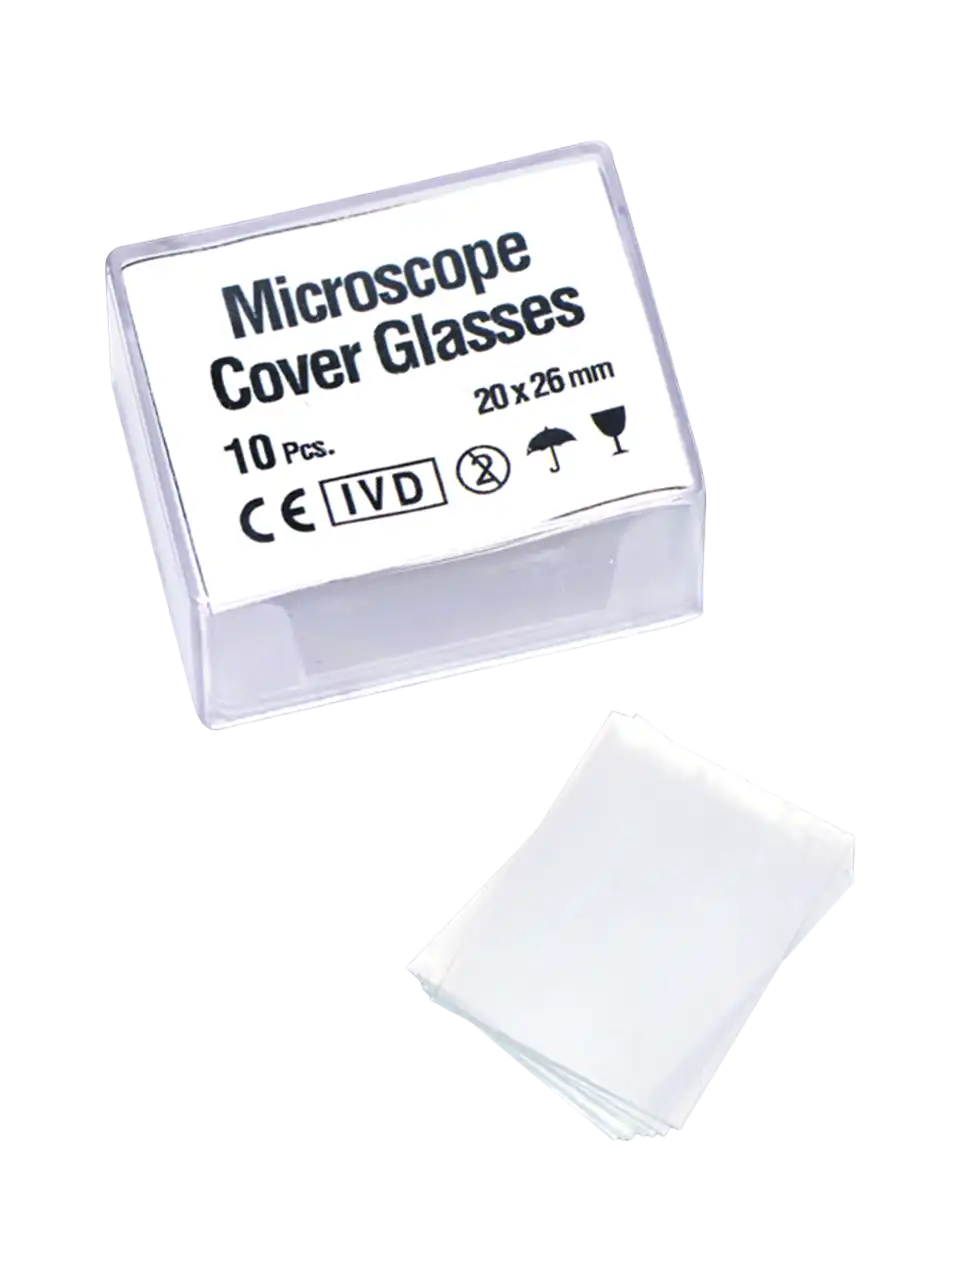 Cover Glasses, Optical Glass, for Blood Counting Chamber, Ground Edges, 0,4 mm Thickness, 20 x 26 mm Dimensions, 100 pcs/box